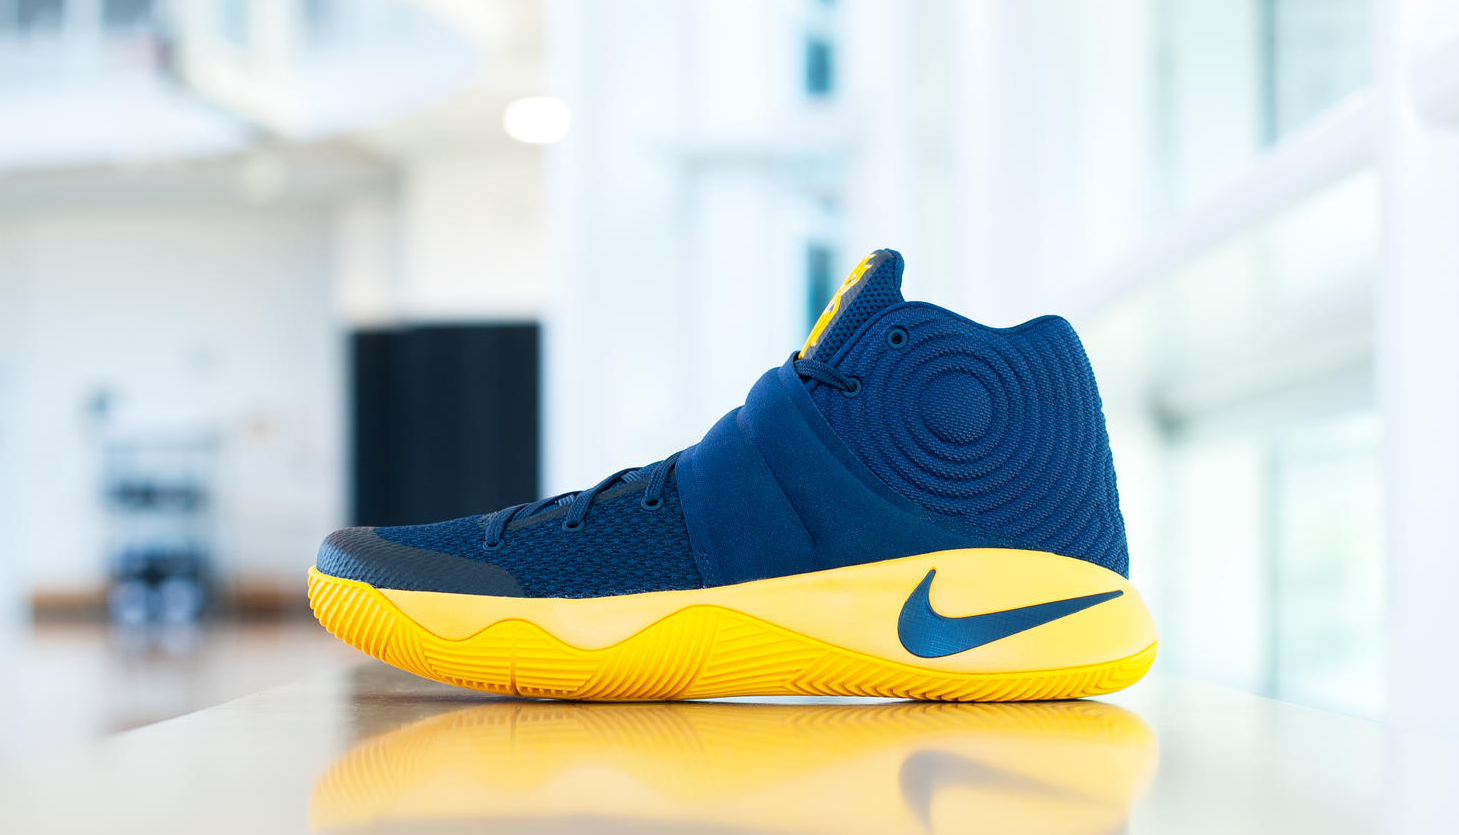 kyrie shoes 2016